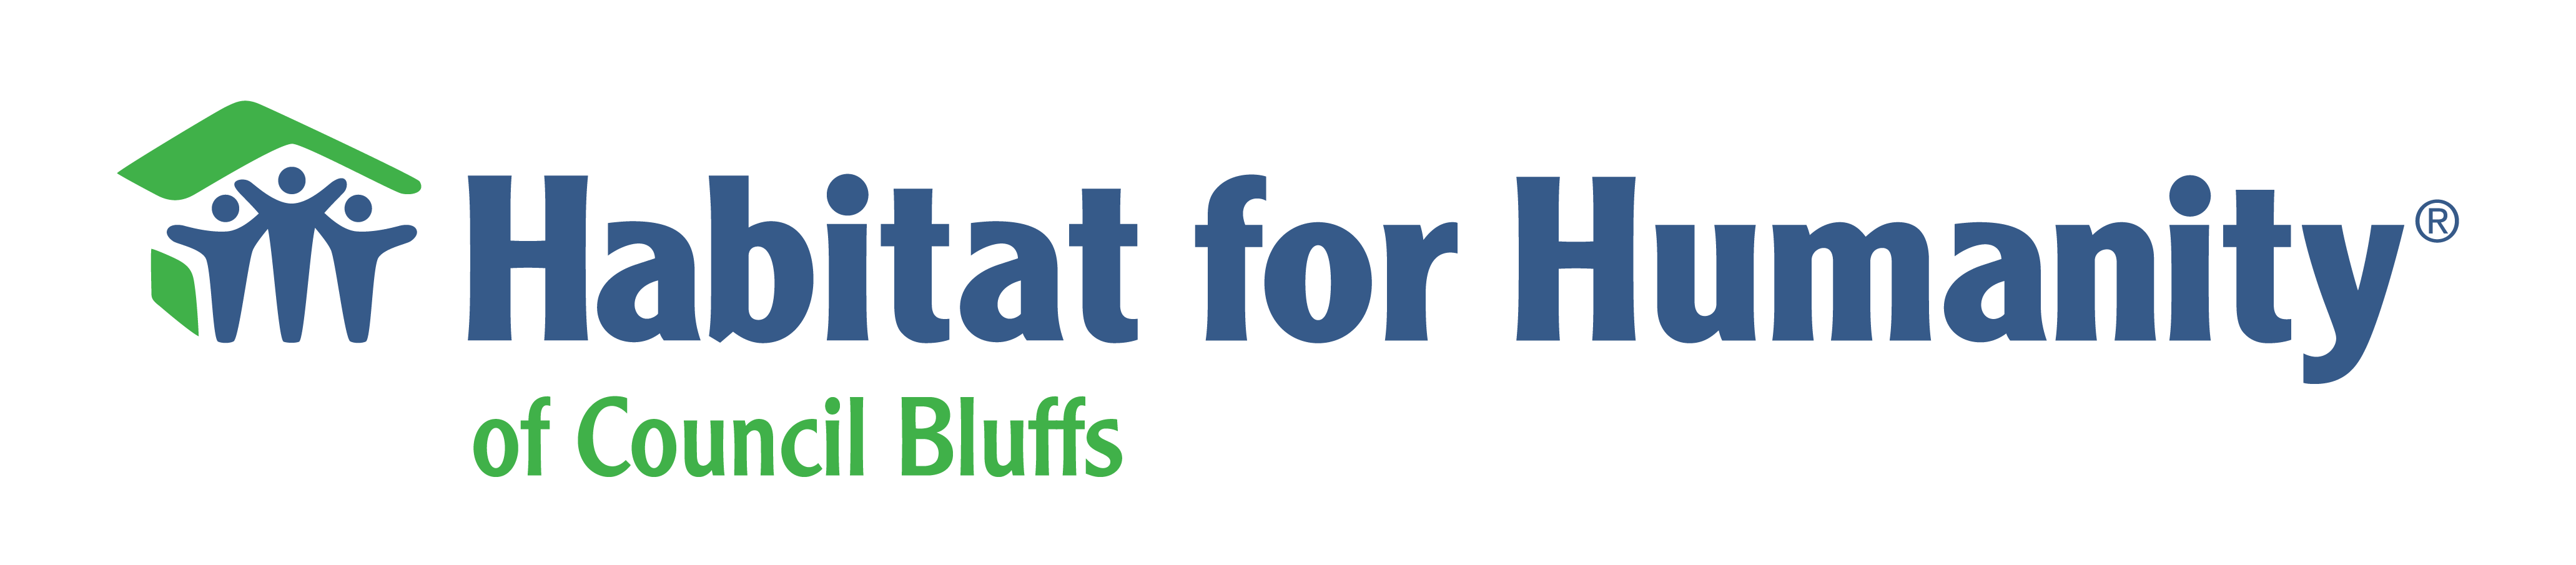 council bluffs habitat for humanity logo